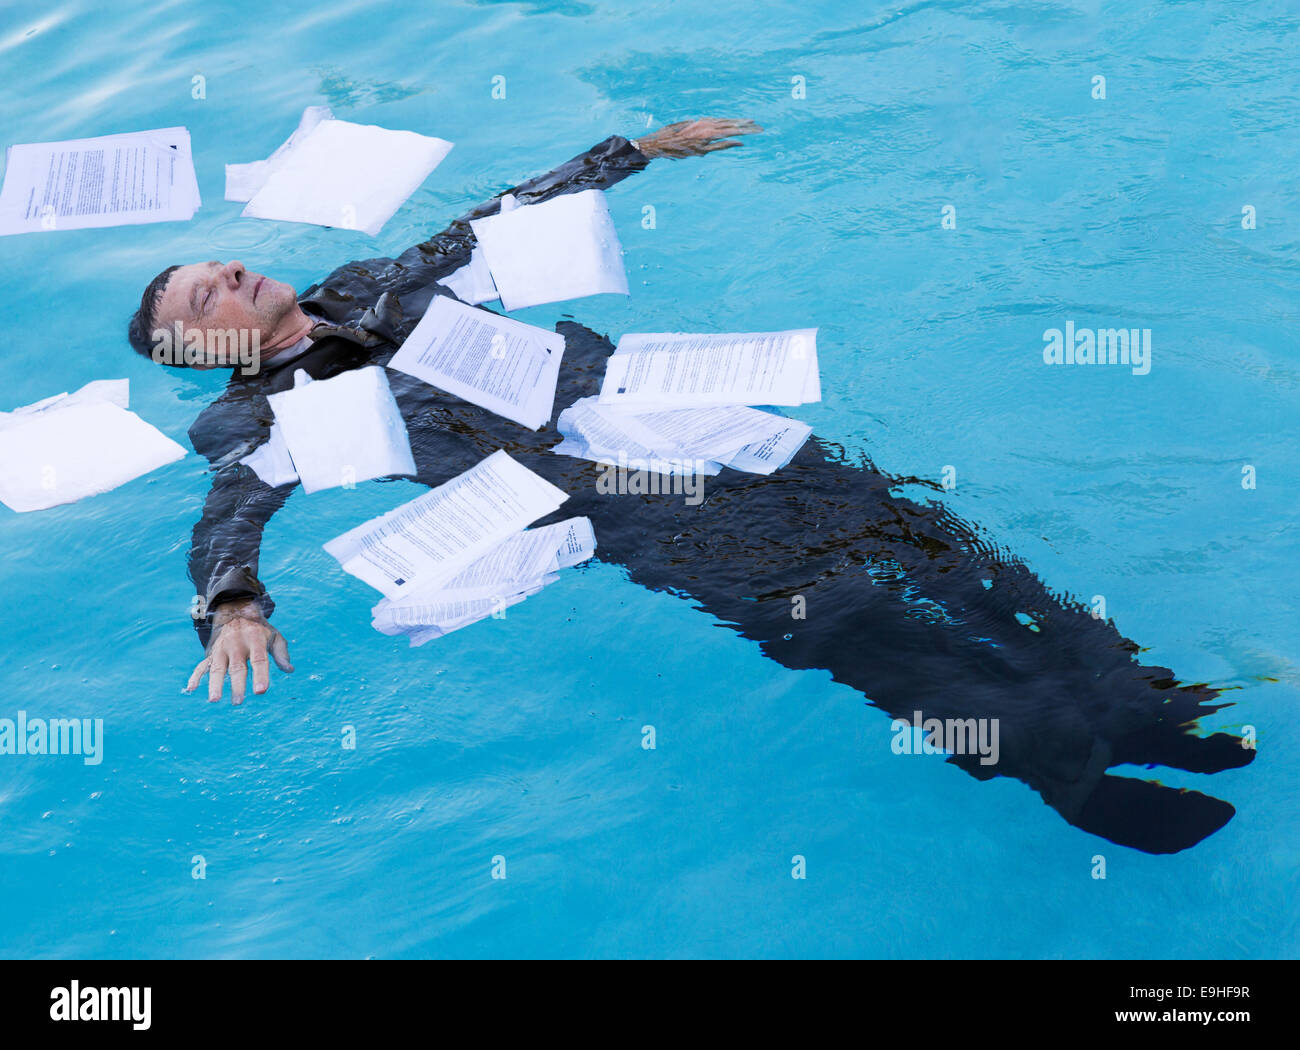 Senior man floating among papers in water Stock Photo